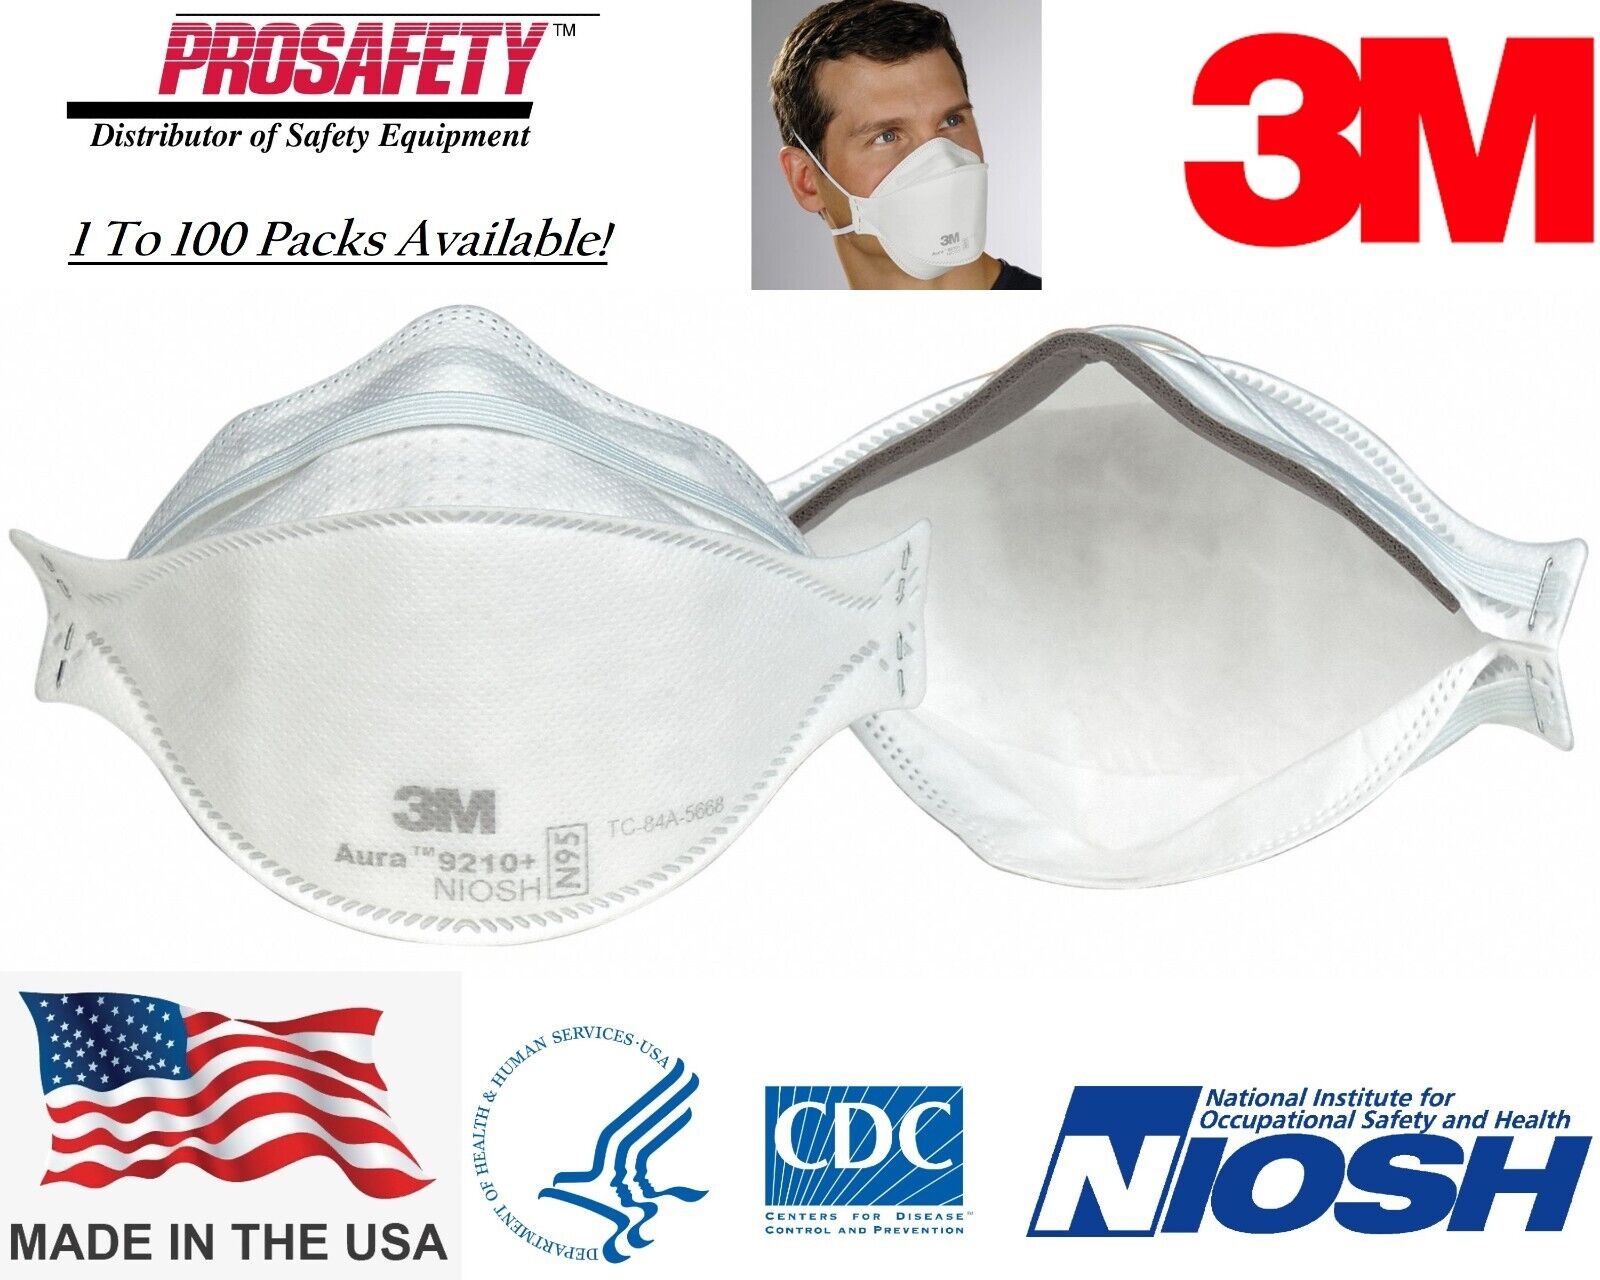 NEW 3M 9210+ Aura N95 Particulate Respiratory Protection Masks NIOSH Approved